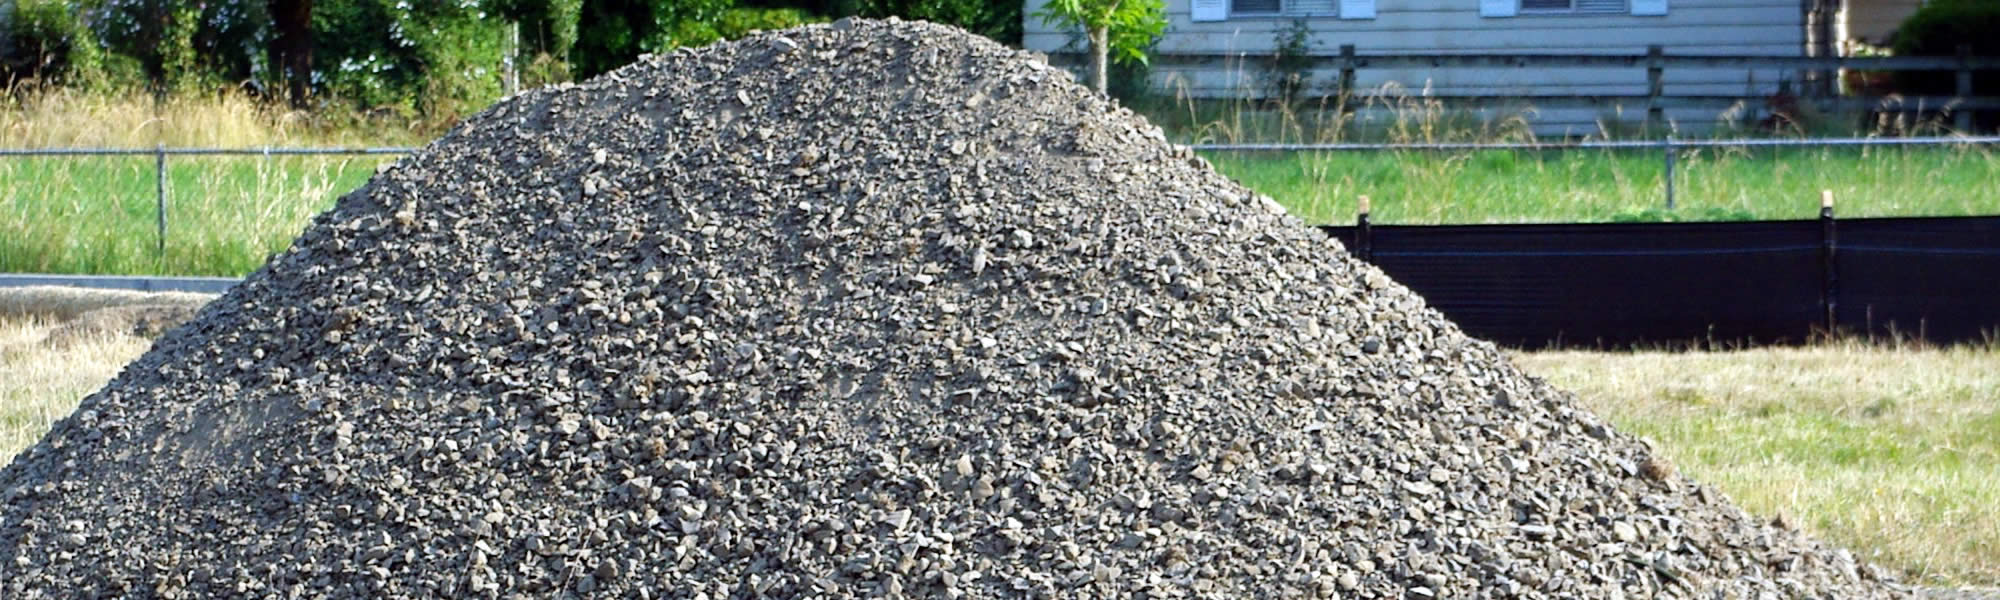 Denmark Gravel and Dirt Delivery Services near me